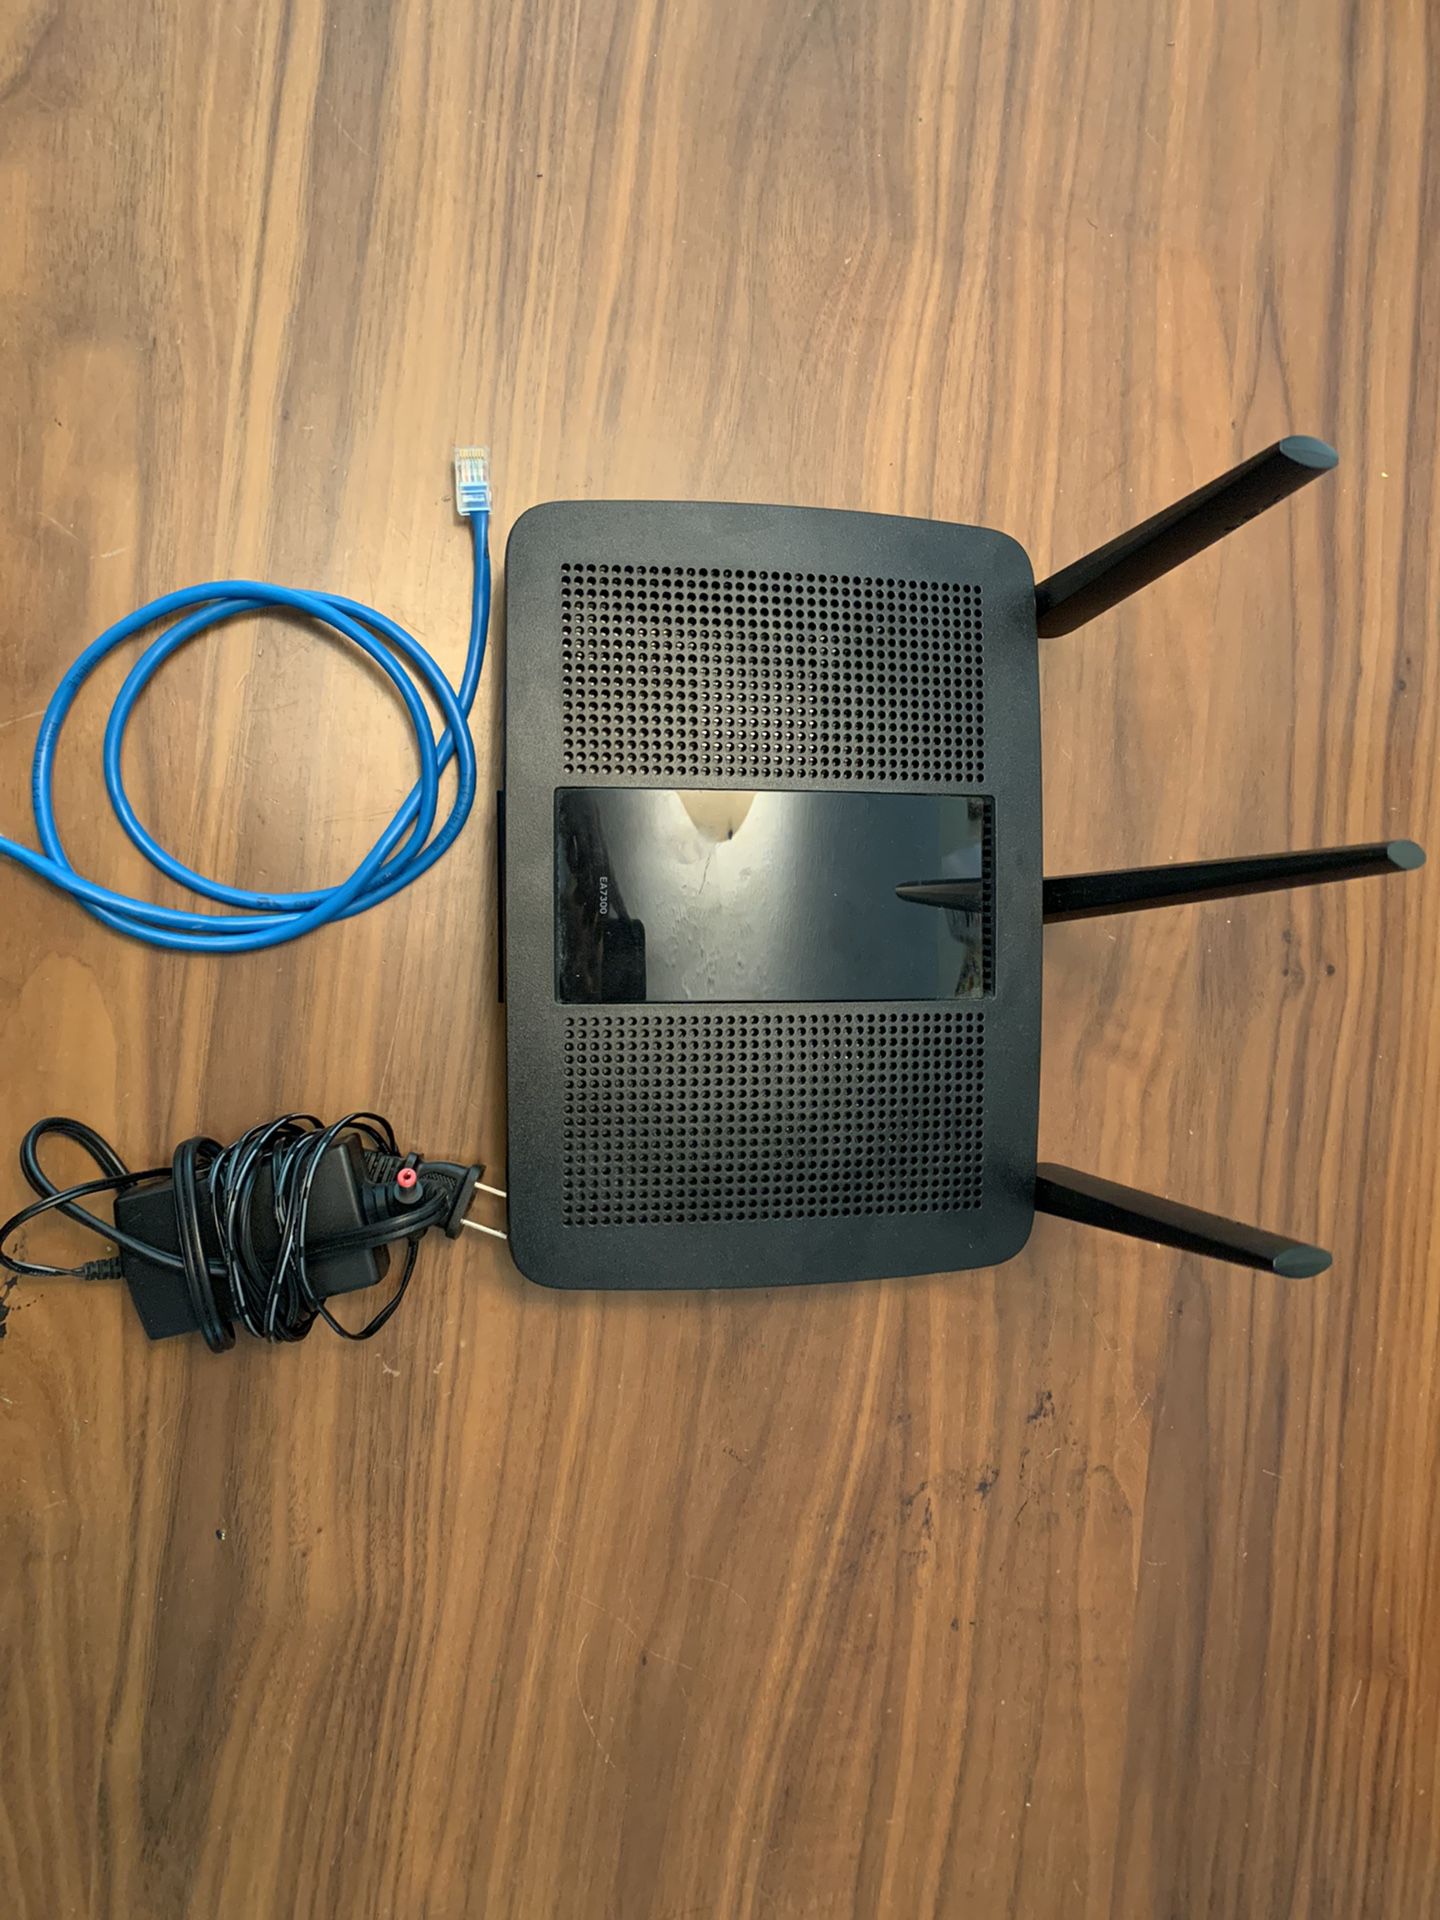 Linksys EA7300 Wi-Fi Router